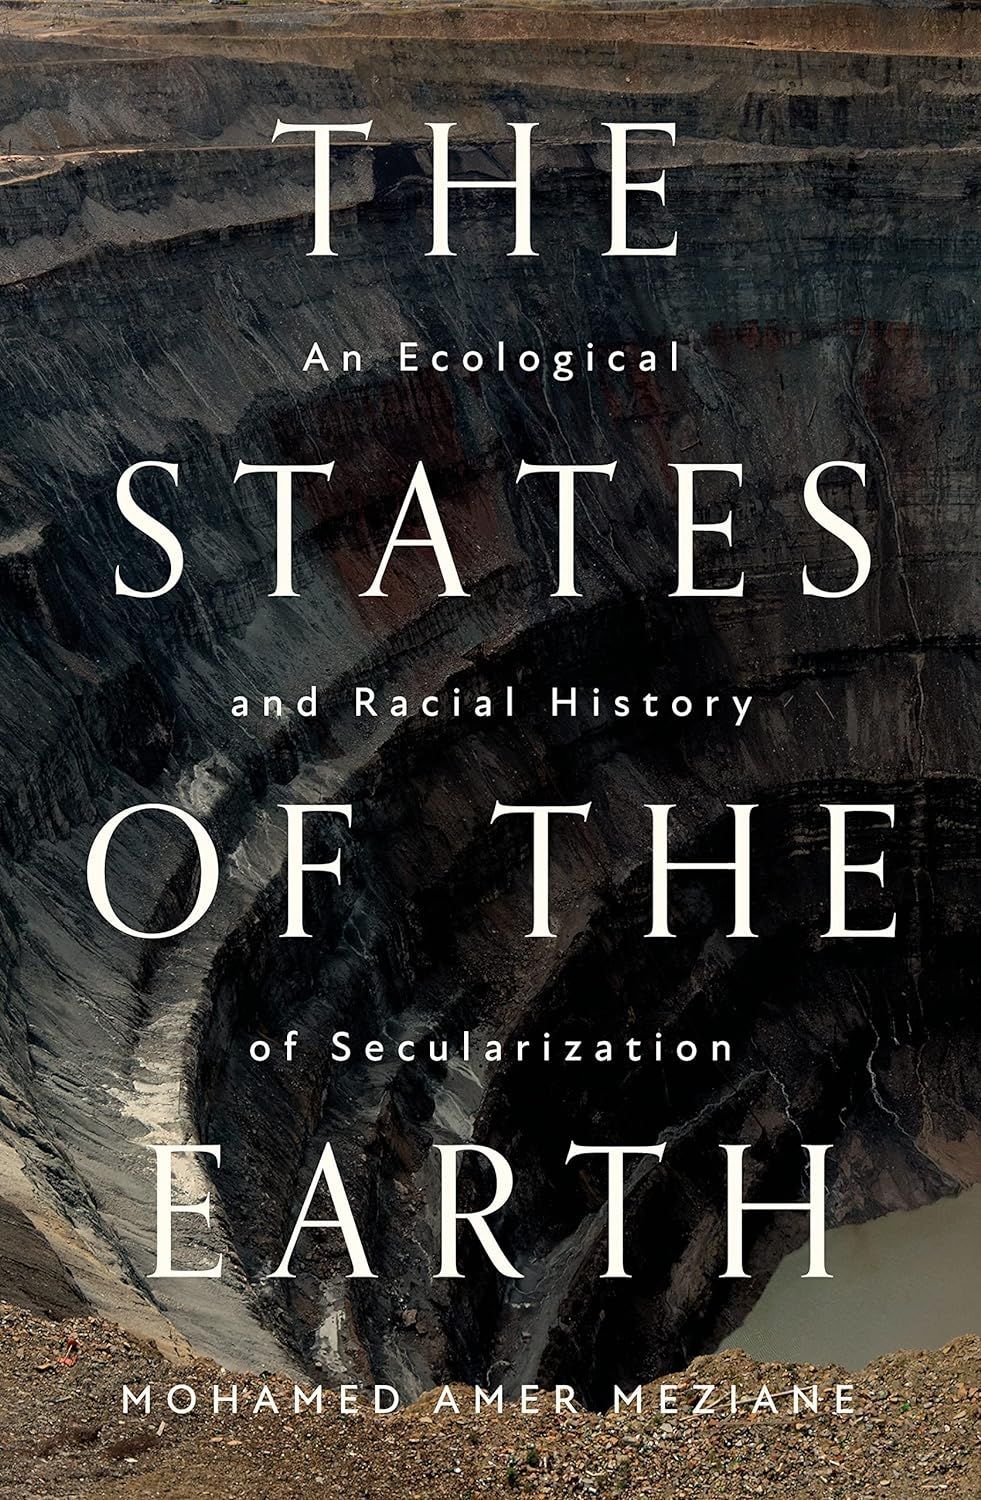 Toward a Genealogy of Fossil Capitalism: On Mohamed Amer Meziane’s “The States of the Earth”